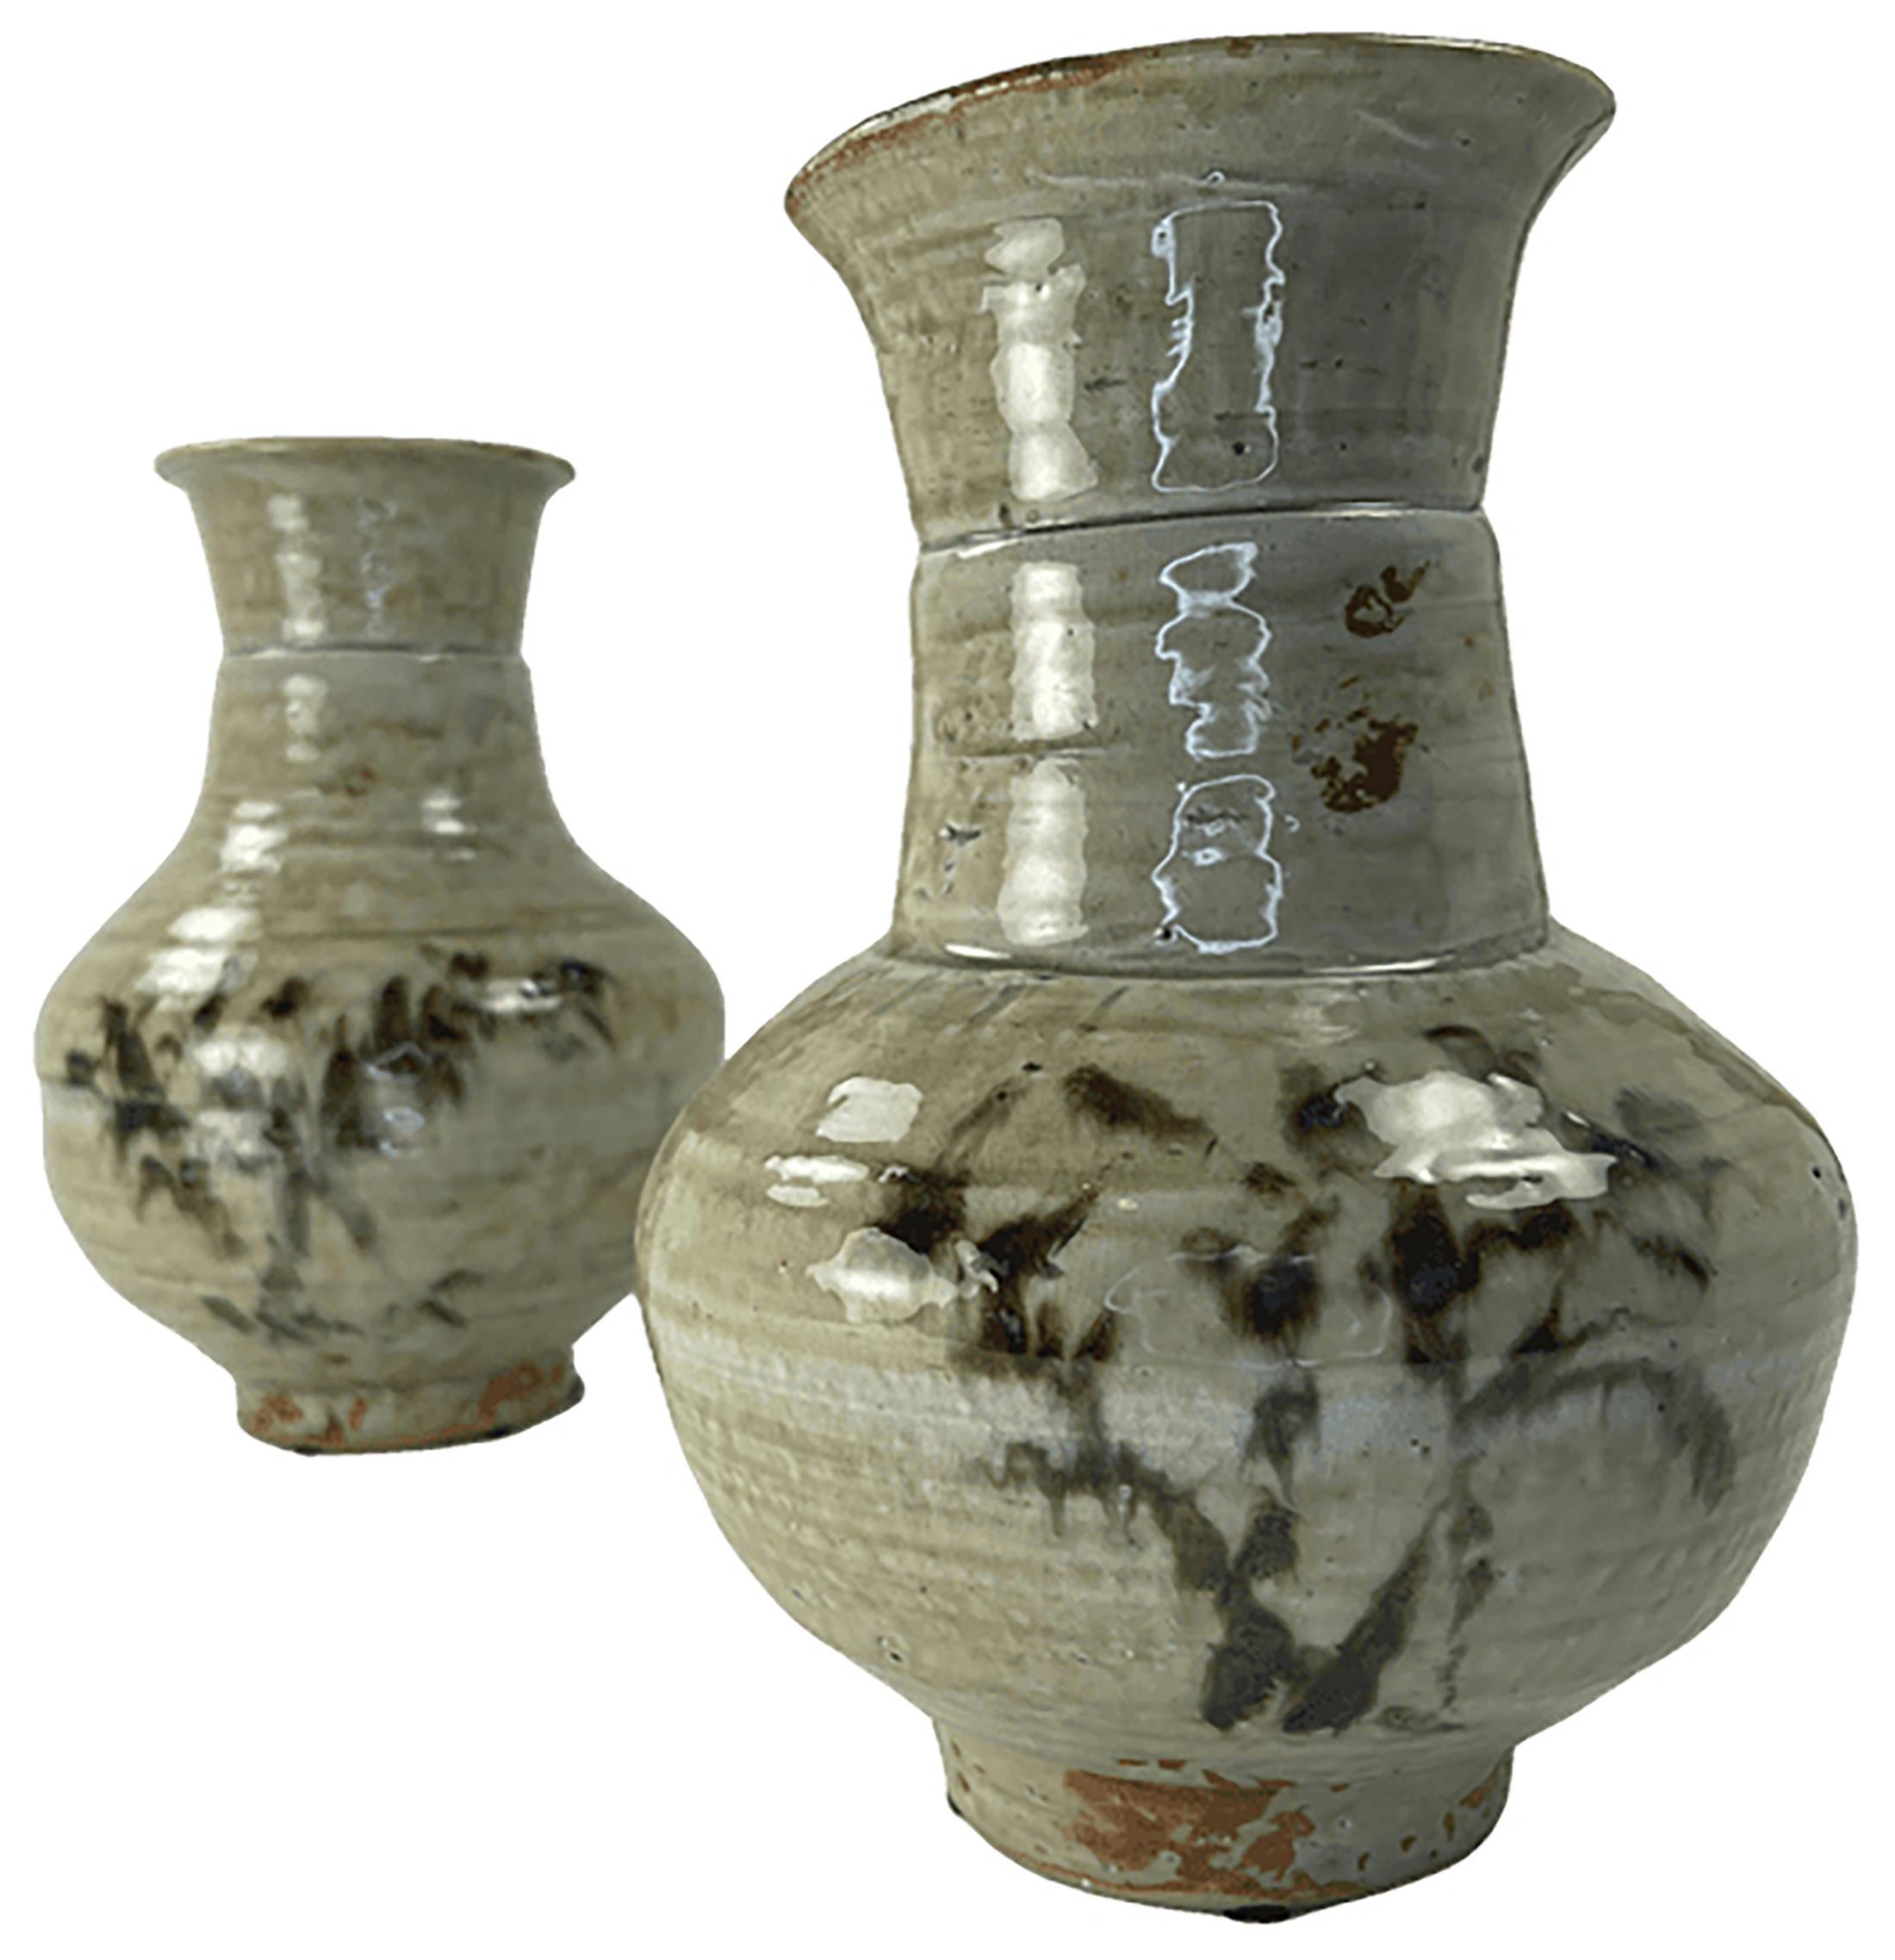 A handsome pair of hand turned, painted, and glazed clay vases. Possibly Korean in Origin. The finish is of a slightly greenish hand applied glaze. Painted bamboo or abstract trees adorn the sides of the vases. Hand turned and decorated. No visible